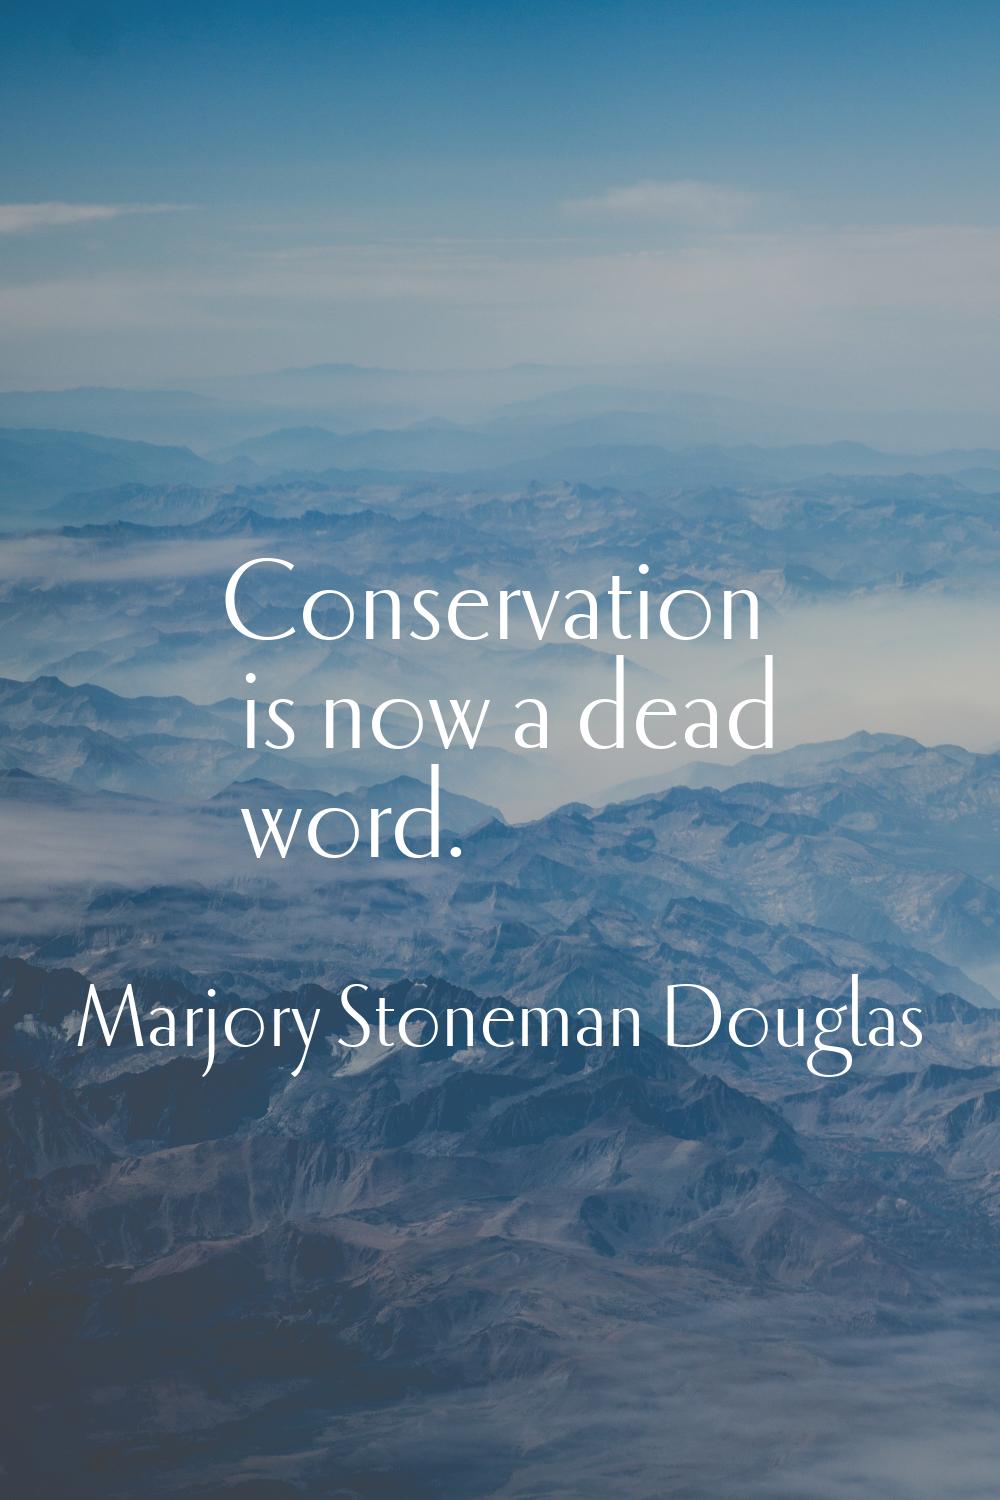 Conservation is now a dead word.